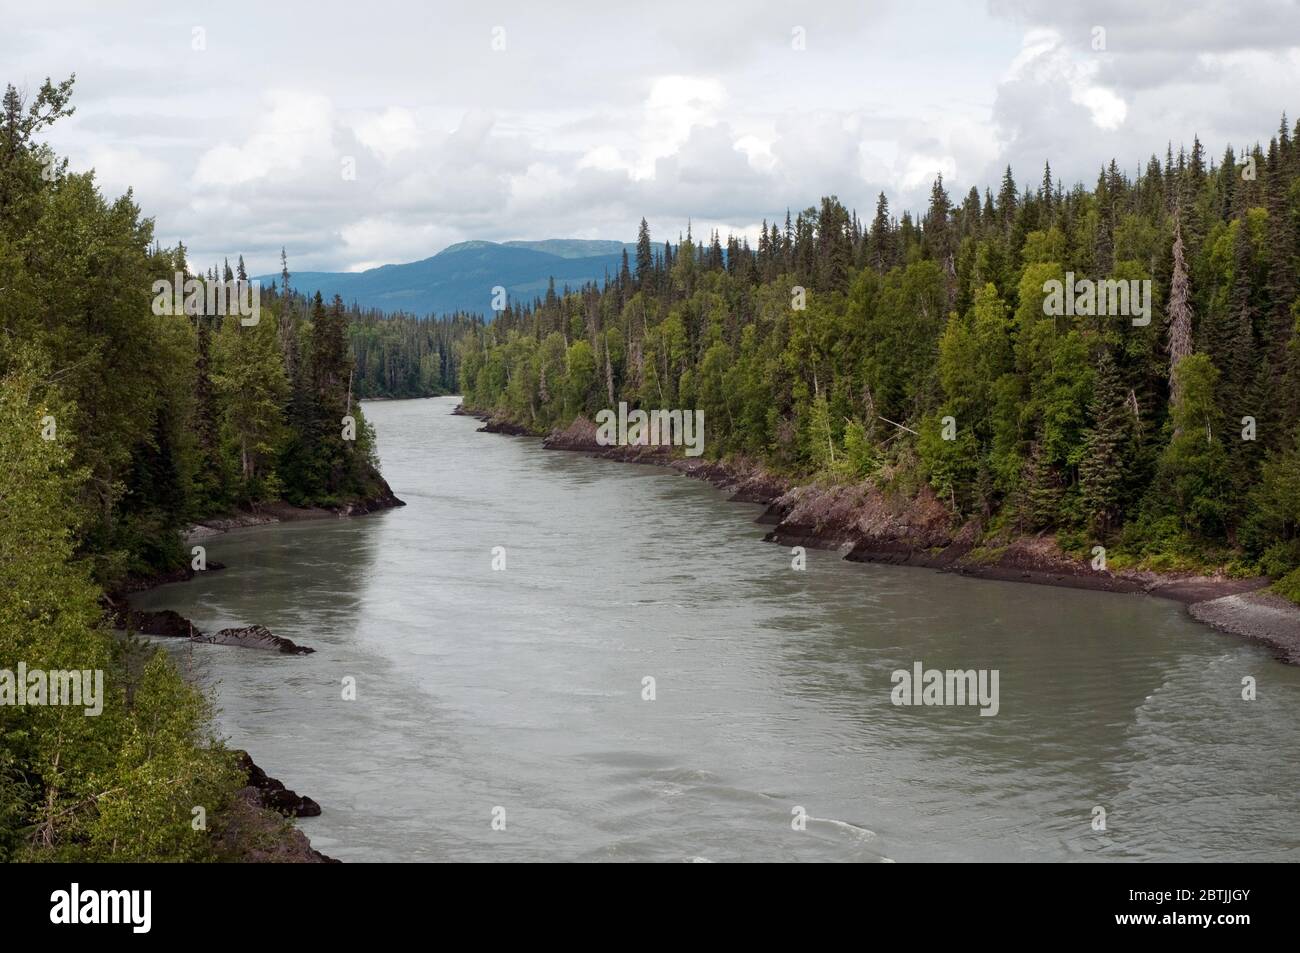 The Nass River Valley, boreal forest and Skeena Mountains, seen from the Stewart Cassiar Highway, in northern British Columbia, Canada. Stock Photo